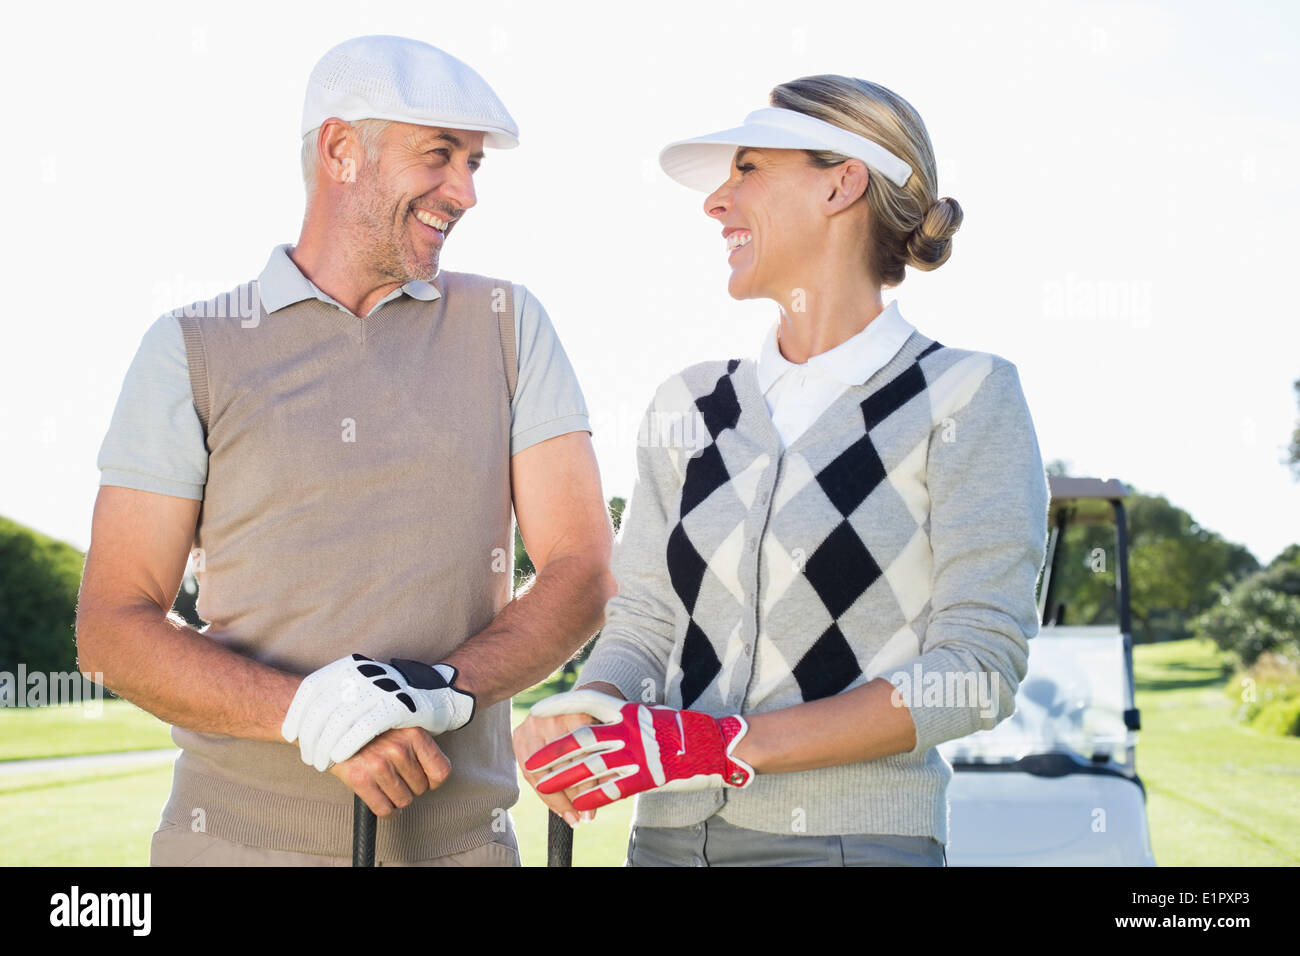 Happy golfing couple facing each other with golf buggy behind Stock Photo